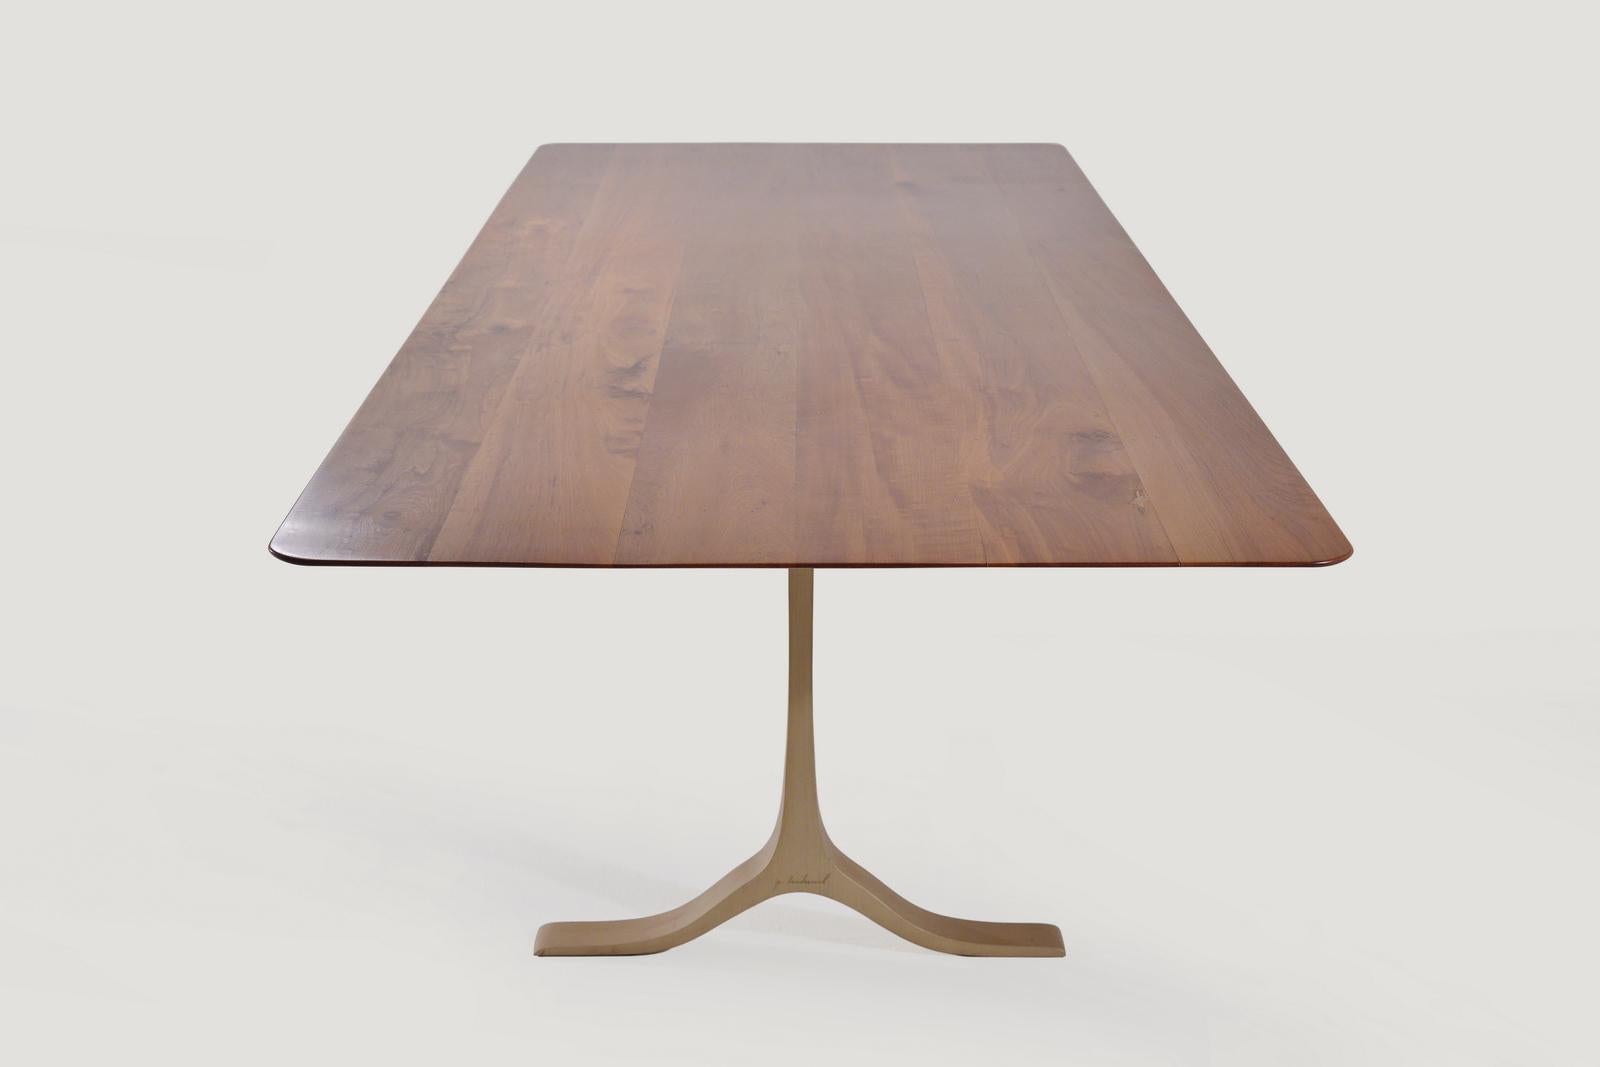 Minimalist Bespoke Dining Table, Reclaimed Wood, Sand Cast Brass Base, by P. Tendercool For Sale